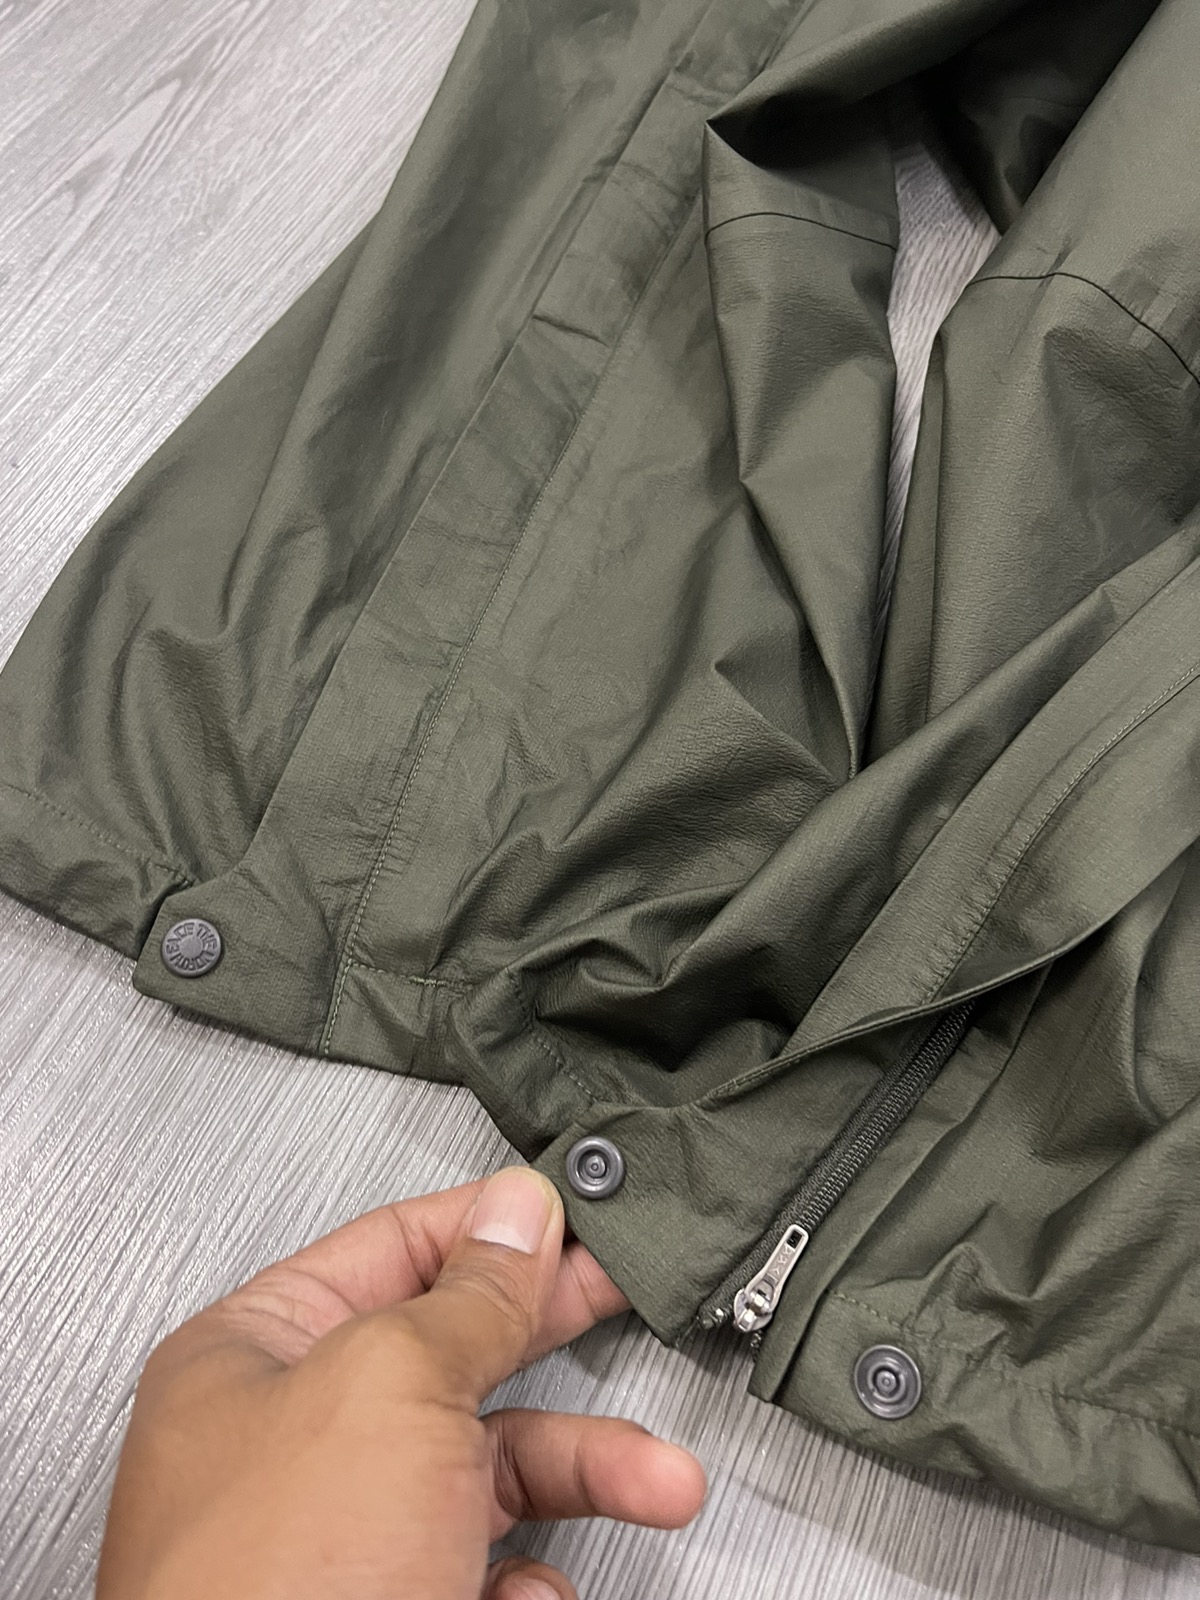 Gorpcore deal🔥The North Face Goretex pant in green - 9